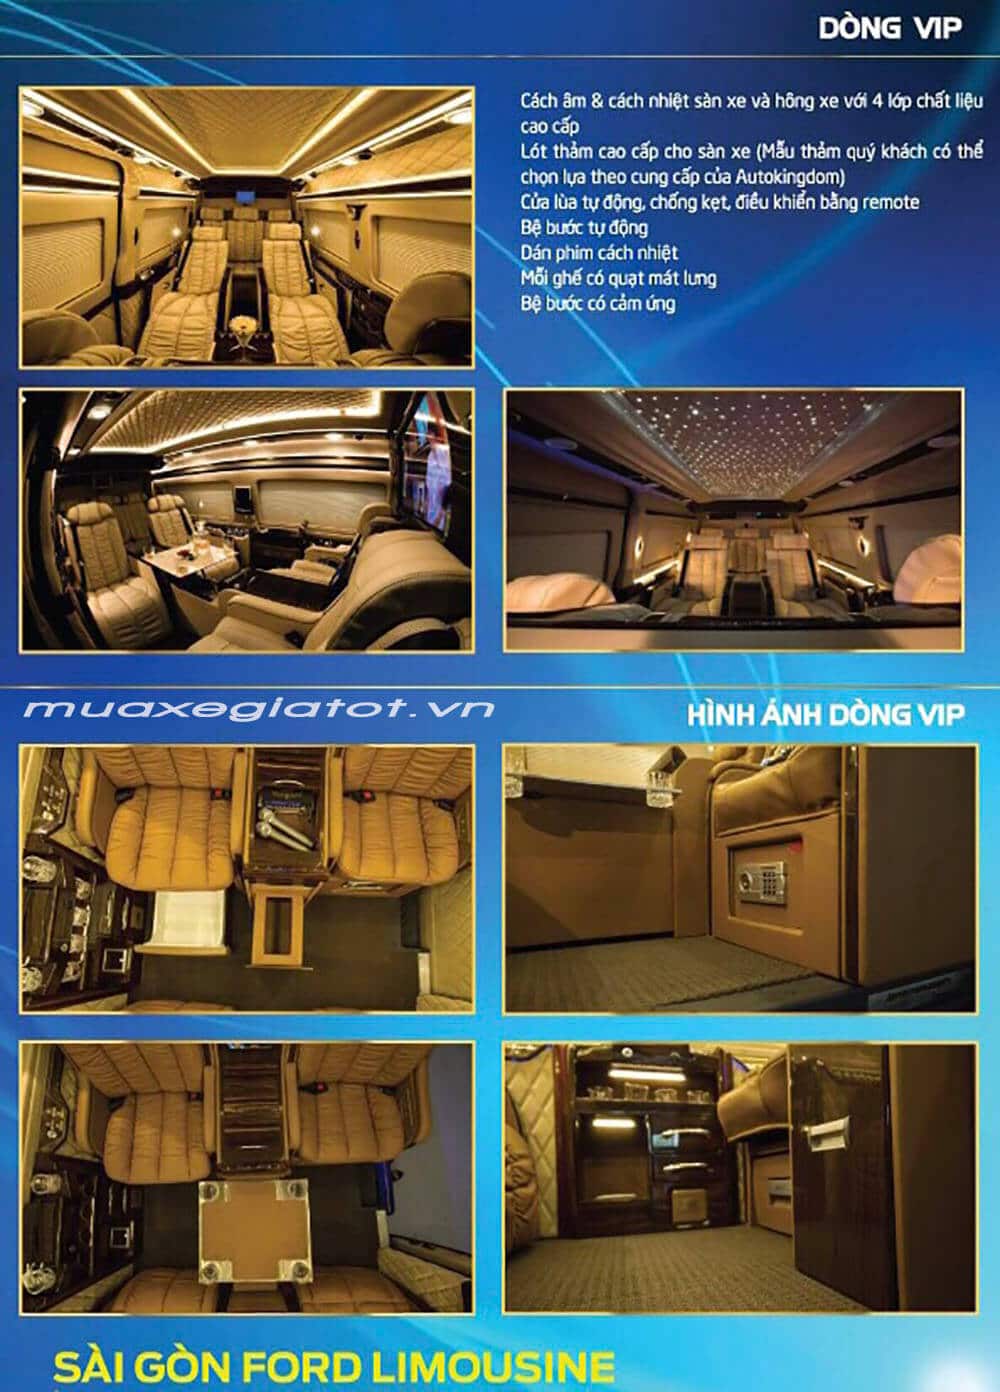 catalogue-xe-ford-transit-limousine-muaxegiatot-vn-4